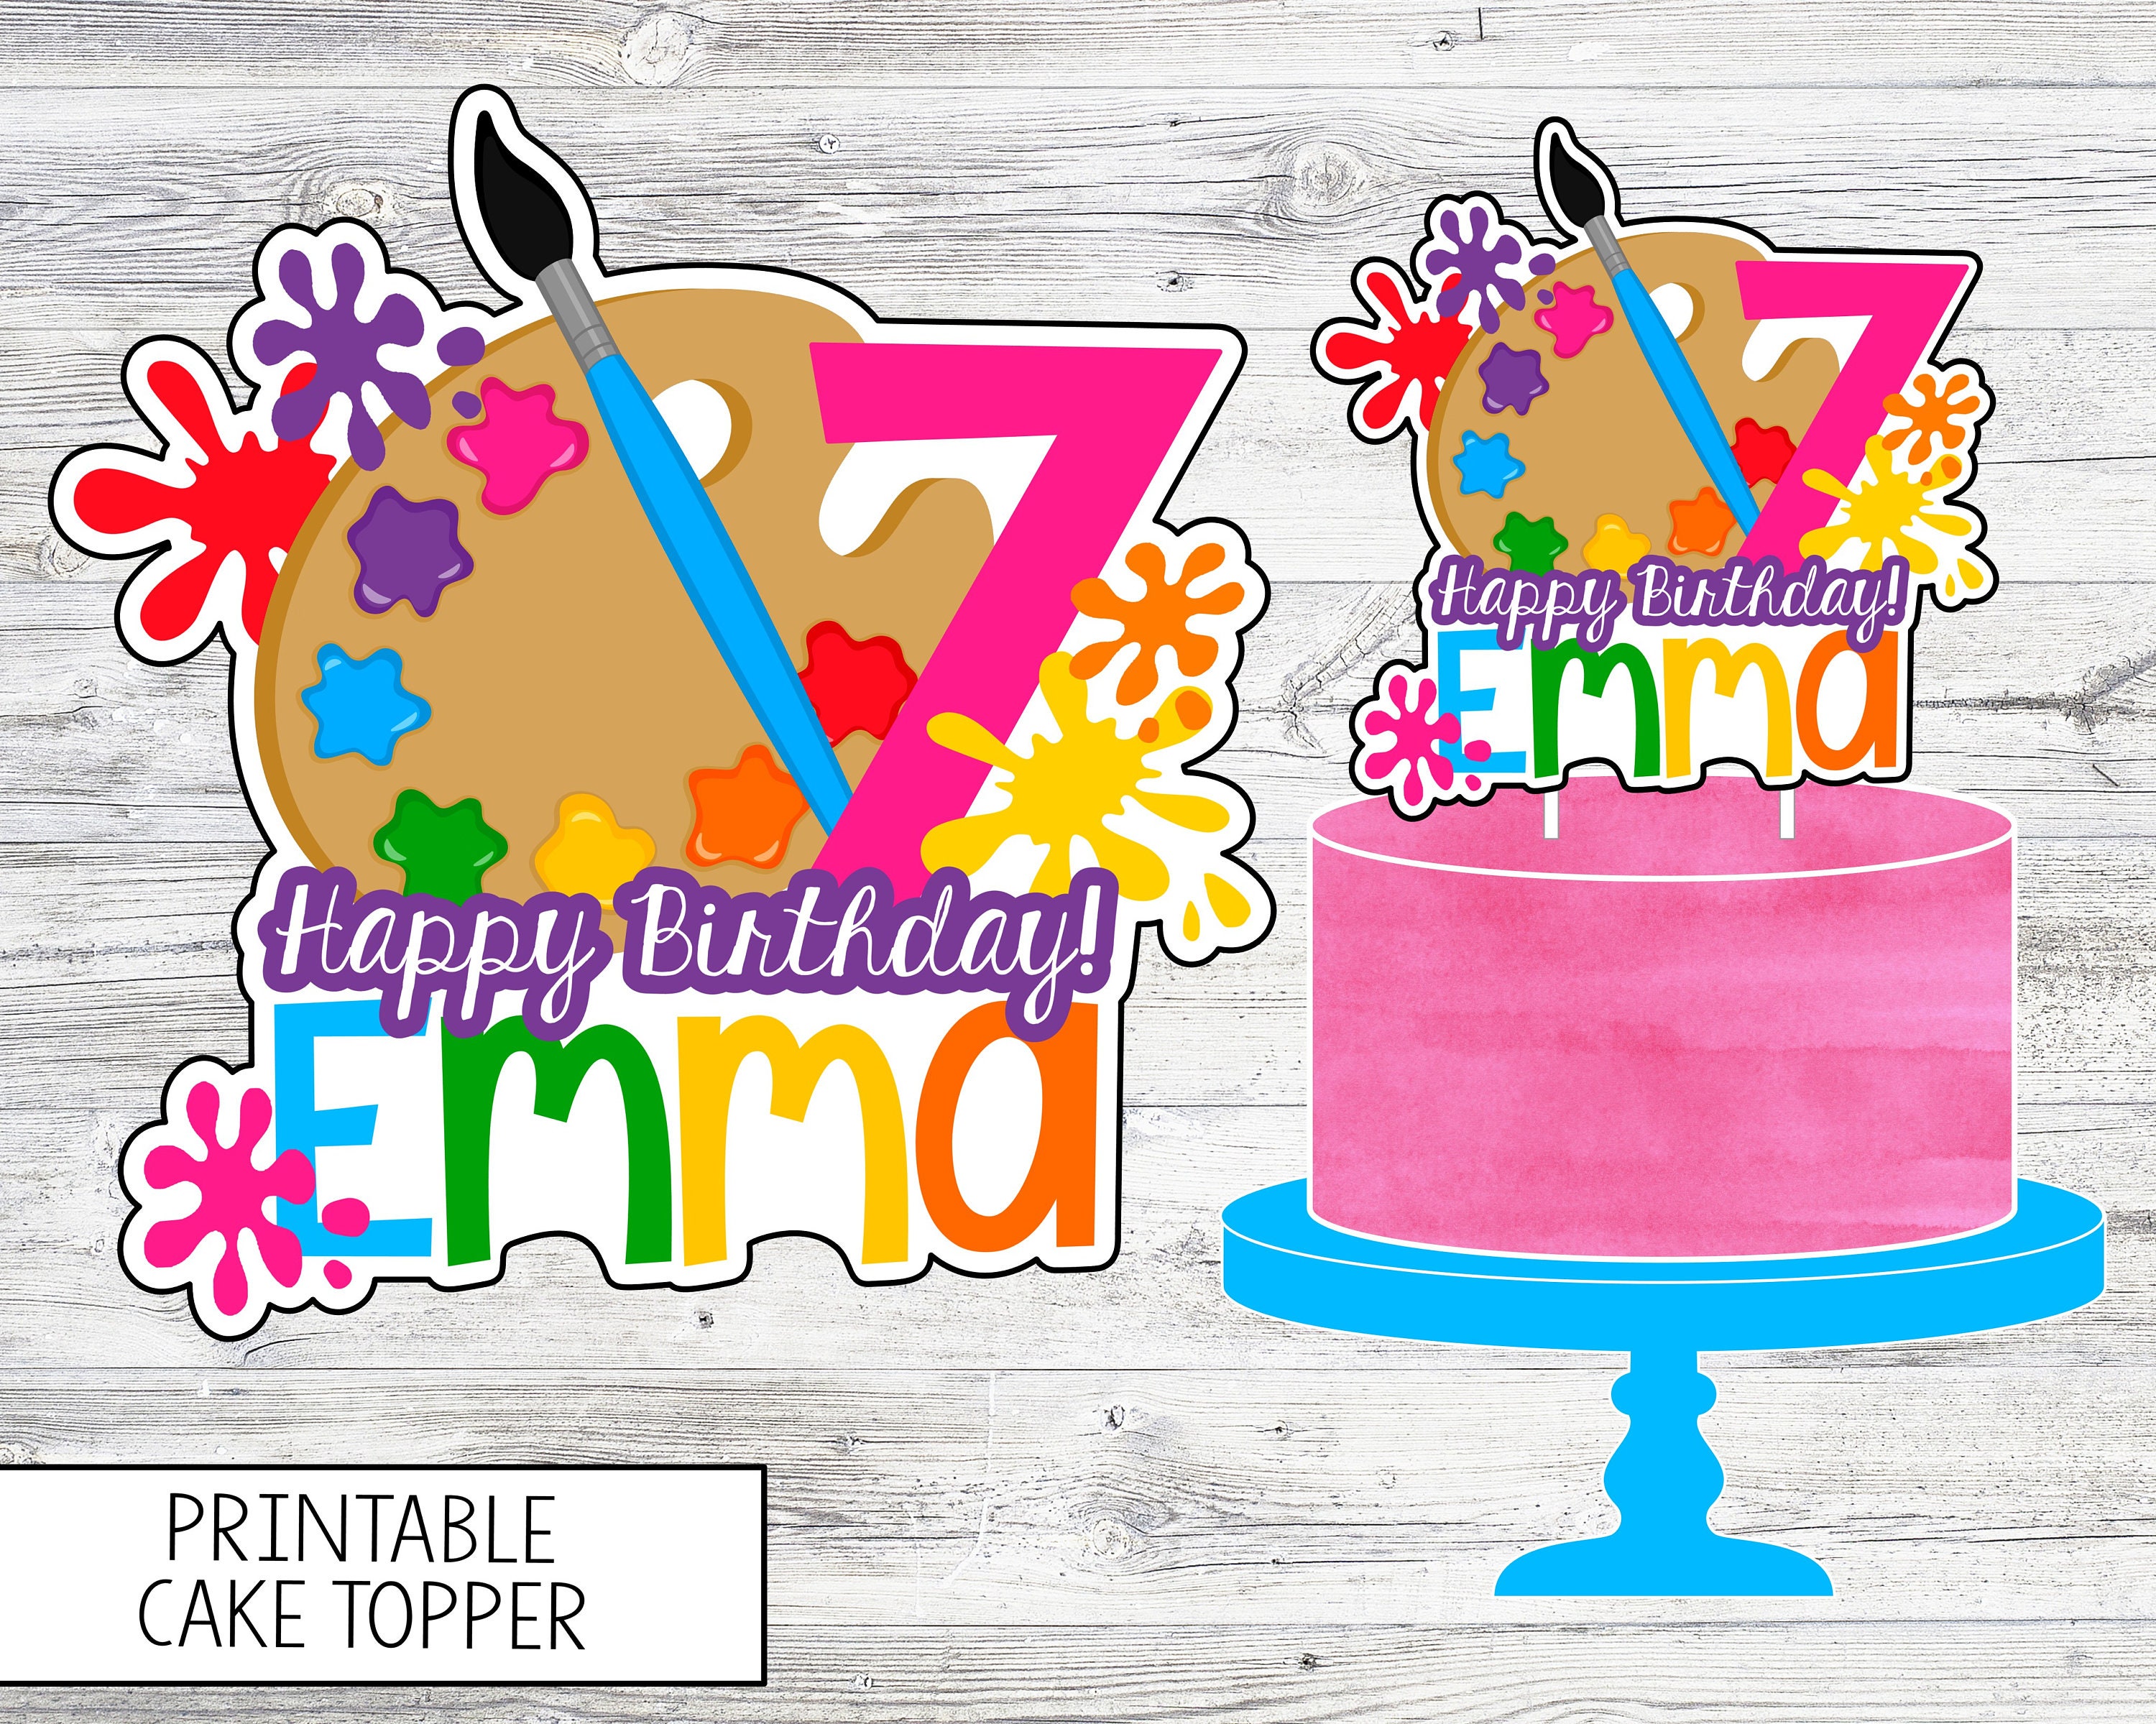 Printable Art Party Cake Topper. Personalized Cake Topper for Painting  Party, Art Party. Digital File- Nothing Physical Sent.